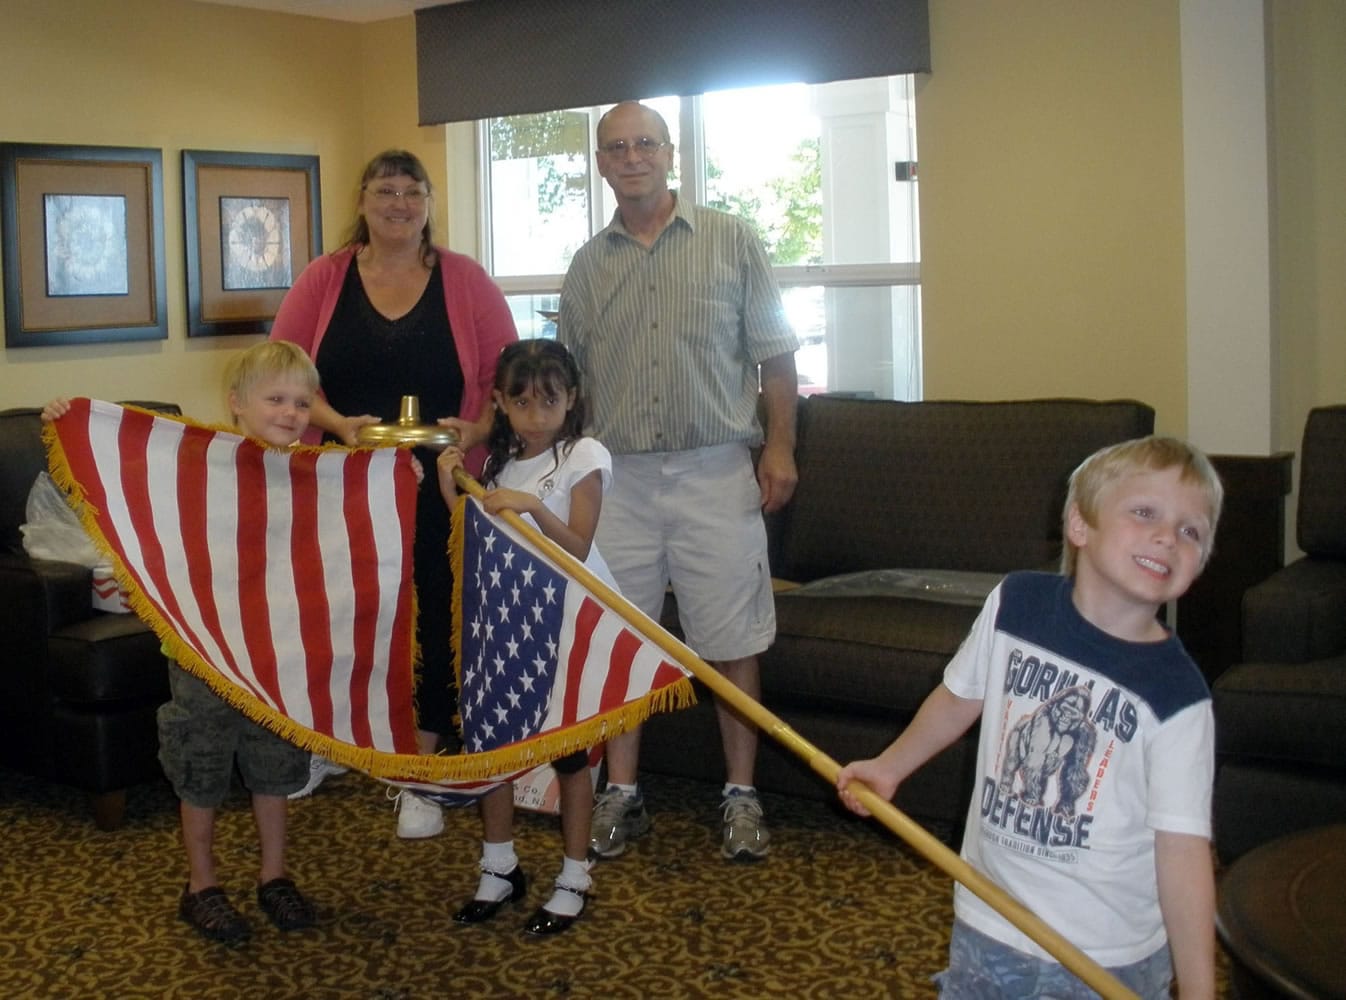 Landover-Sharmel: Vancouver Modern Woodmen of America director Sherree Filla, left, and husband Tim watch as members of the local chapter present a flag to the residents at Bridgewood at Four Seasons Retirement Center.